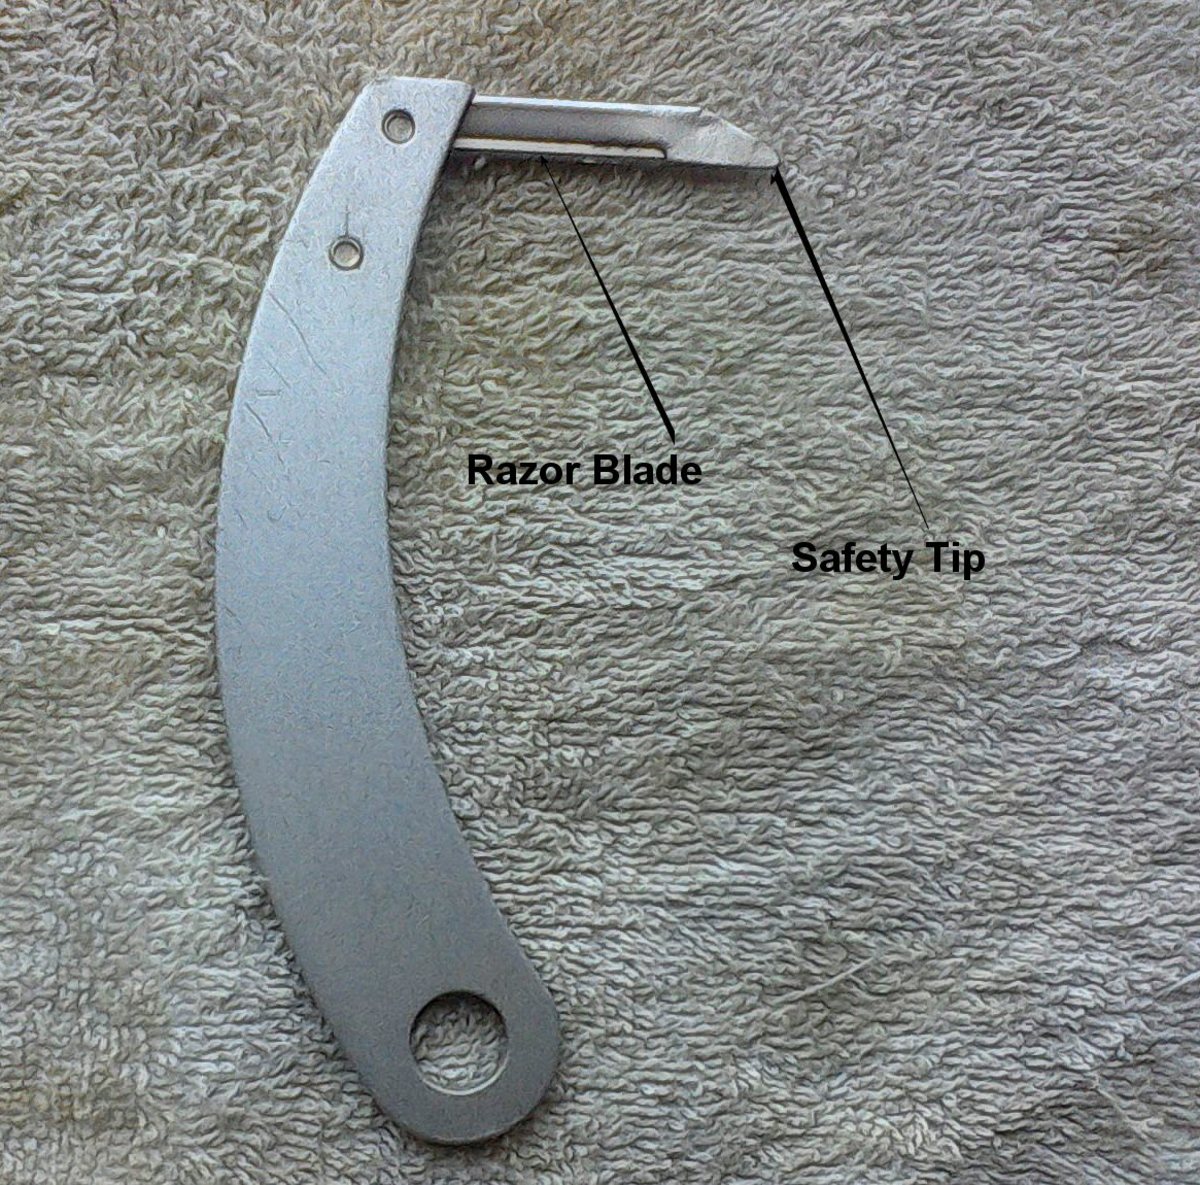 The splitter is a great aid in cutting those large knots into smaller, easier to remove knots. The razor blade can be changed when dull.